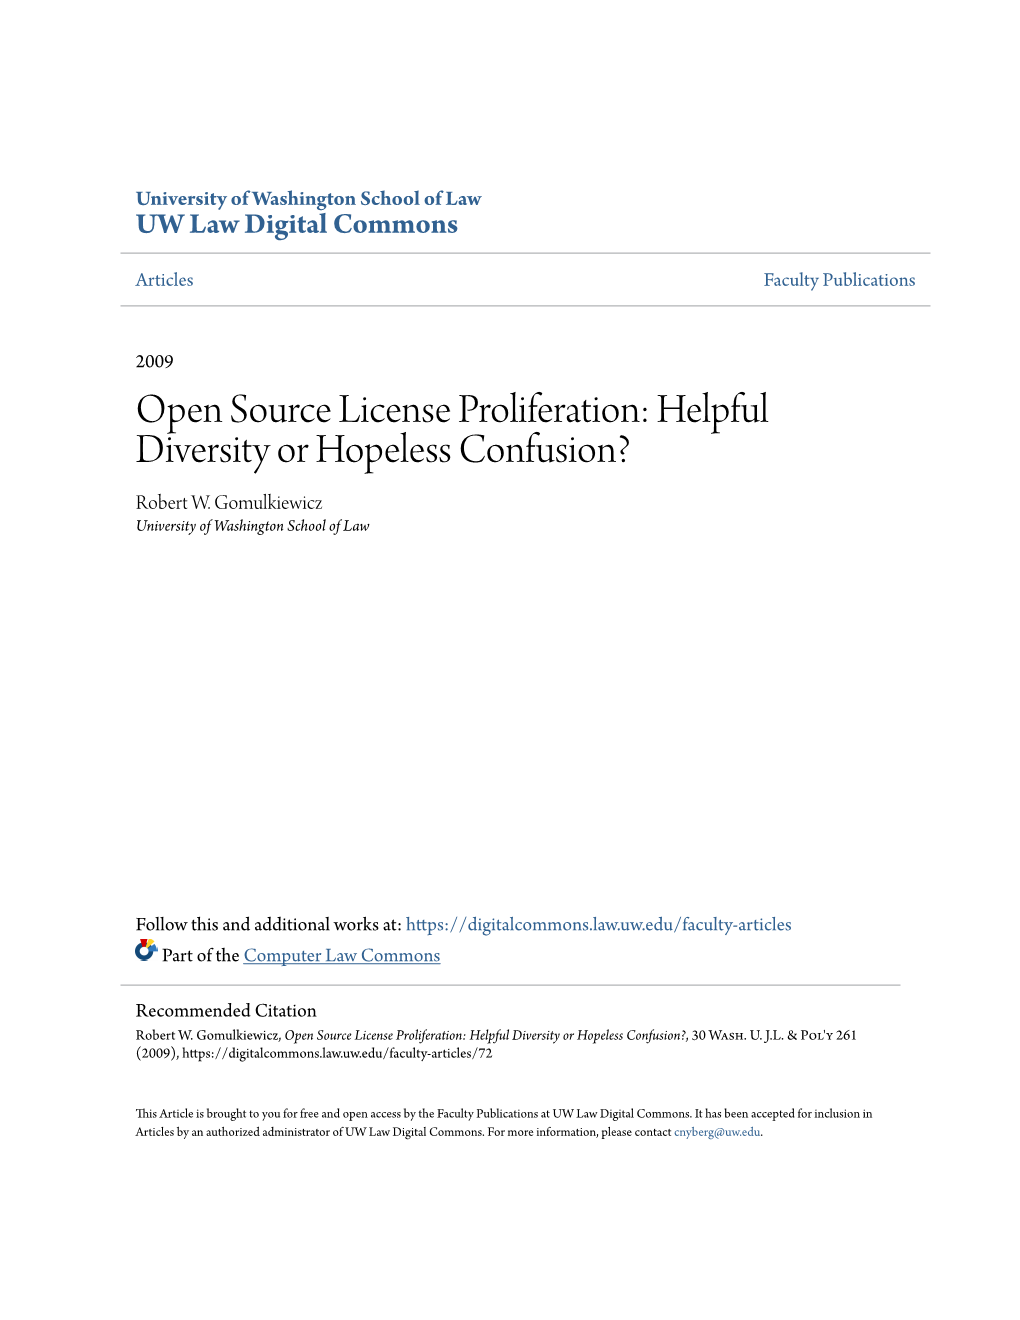 Open Source License Proliferation: Helpful Diversity Or Hopeless Confusion? Robert W